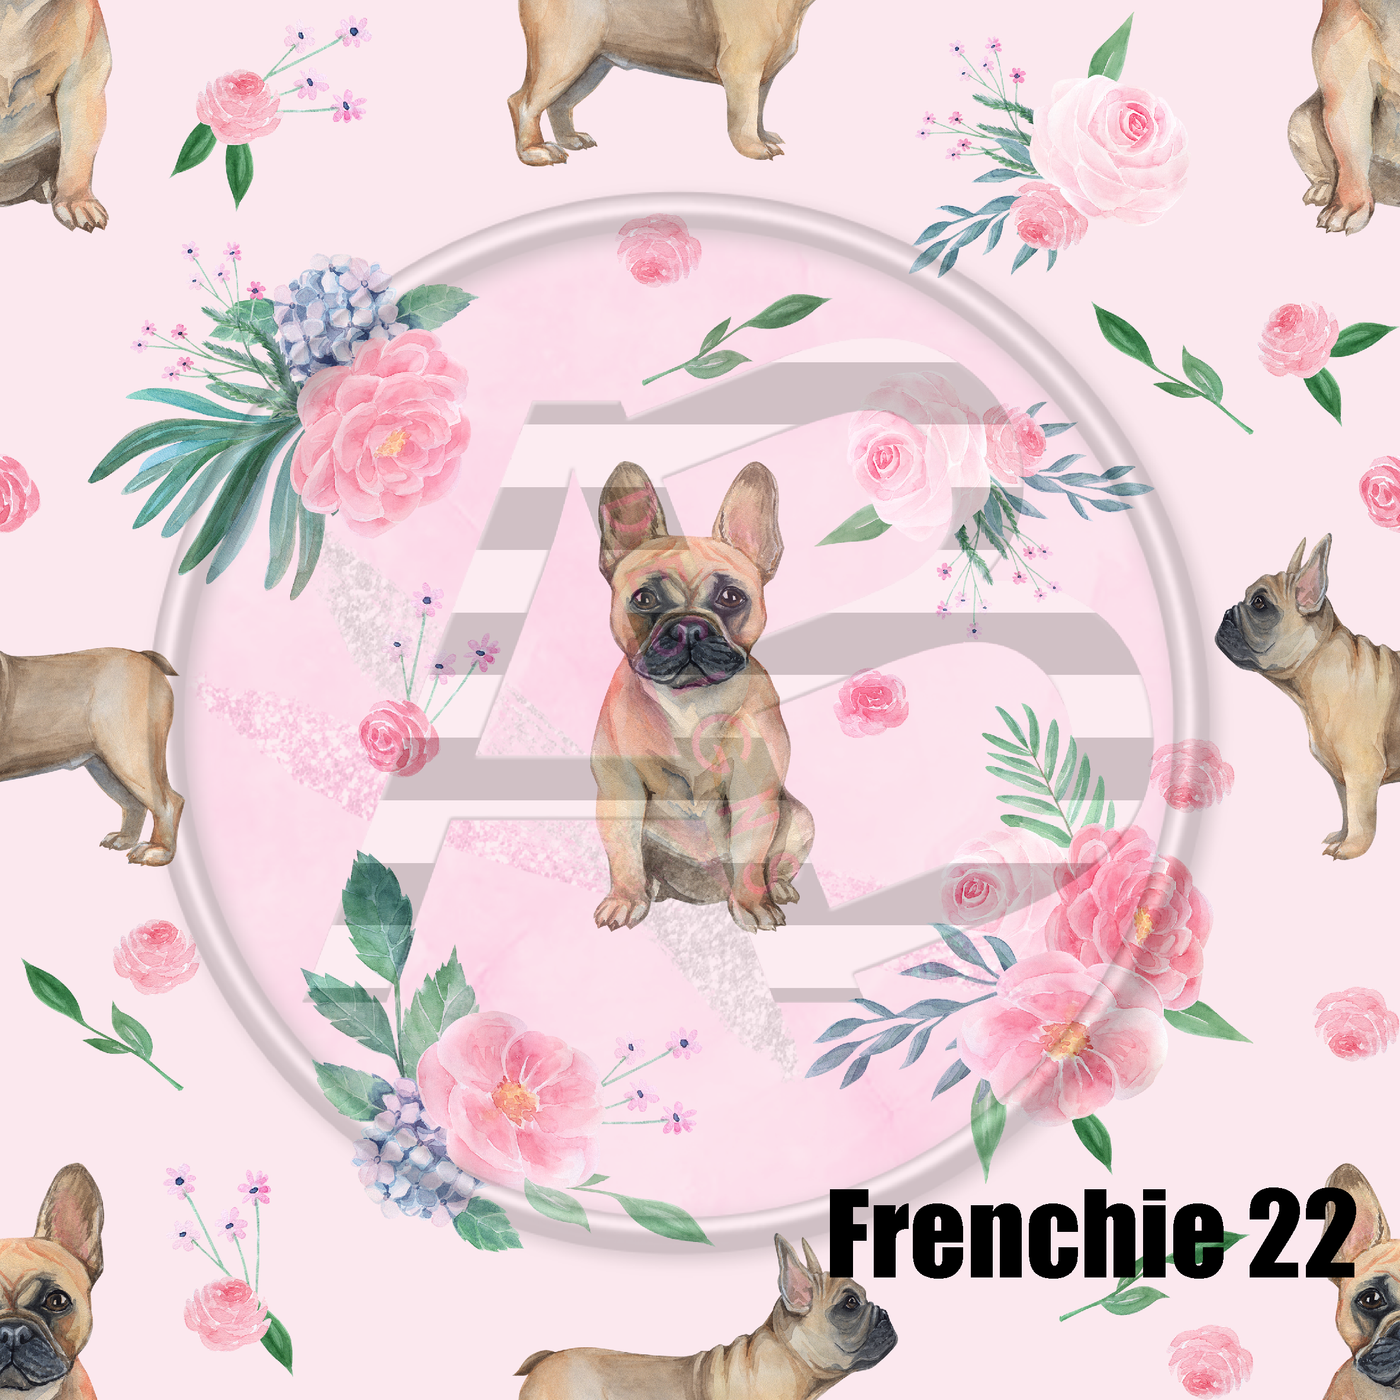 Adhesive Patterned Vinyl - Frenchie 22